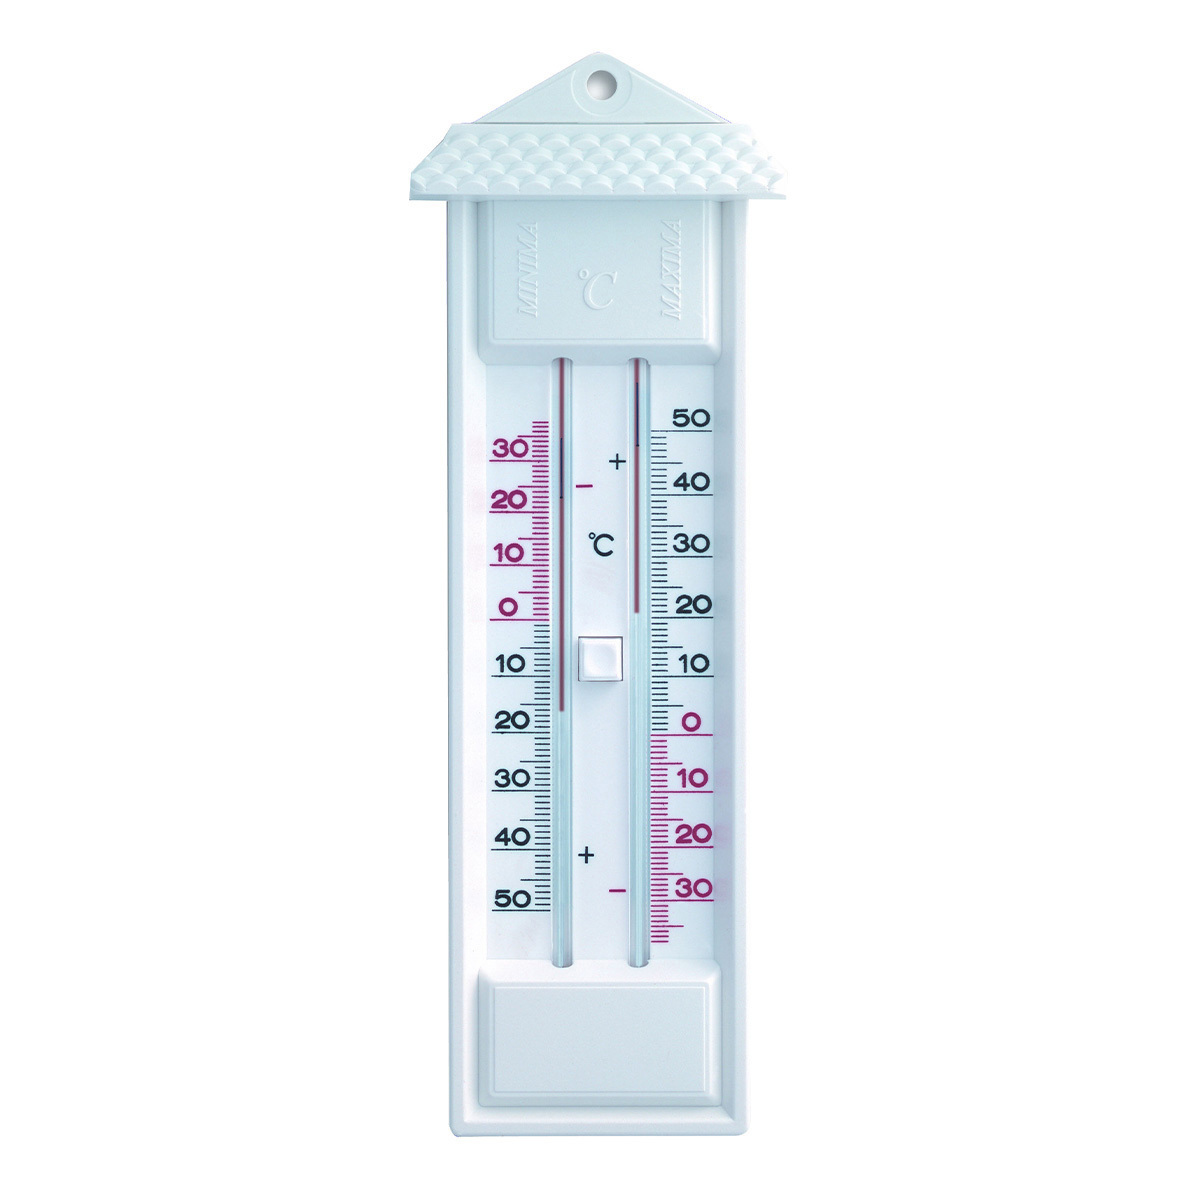 min-max thermometer, online